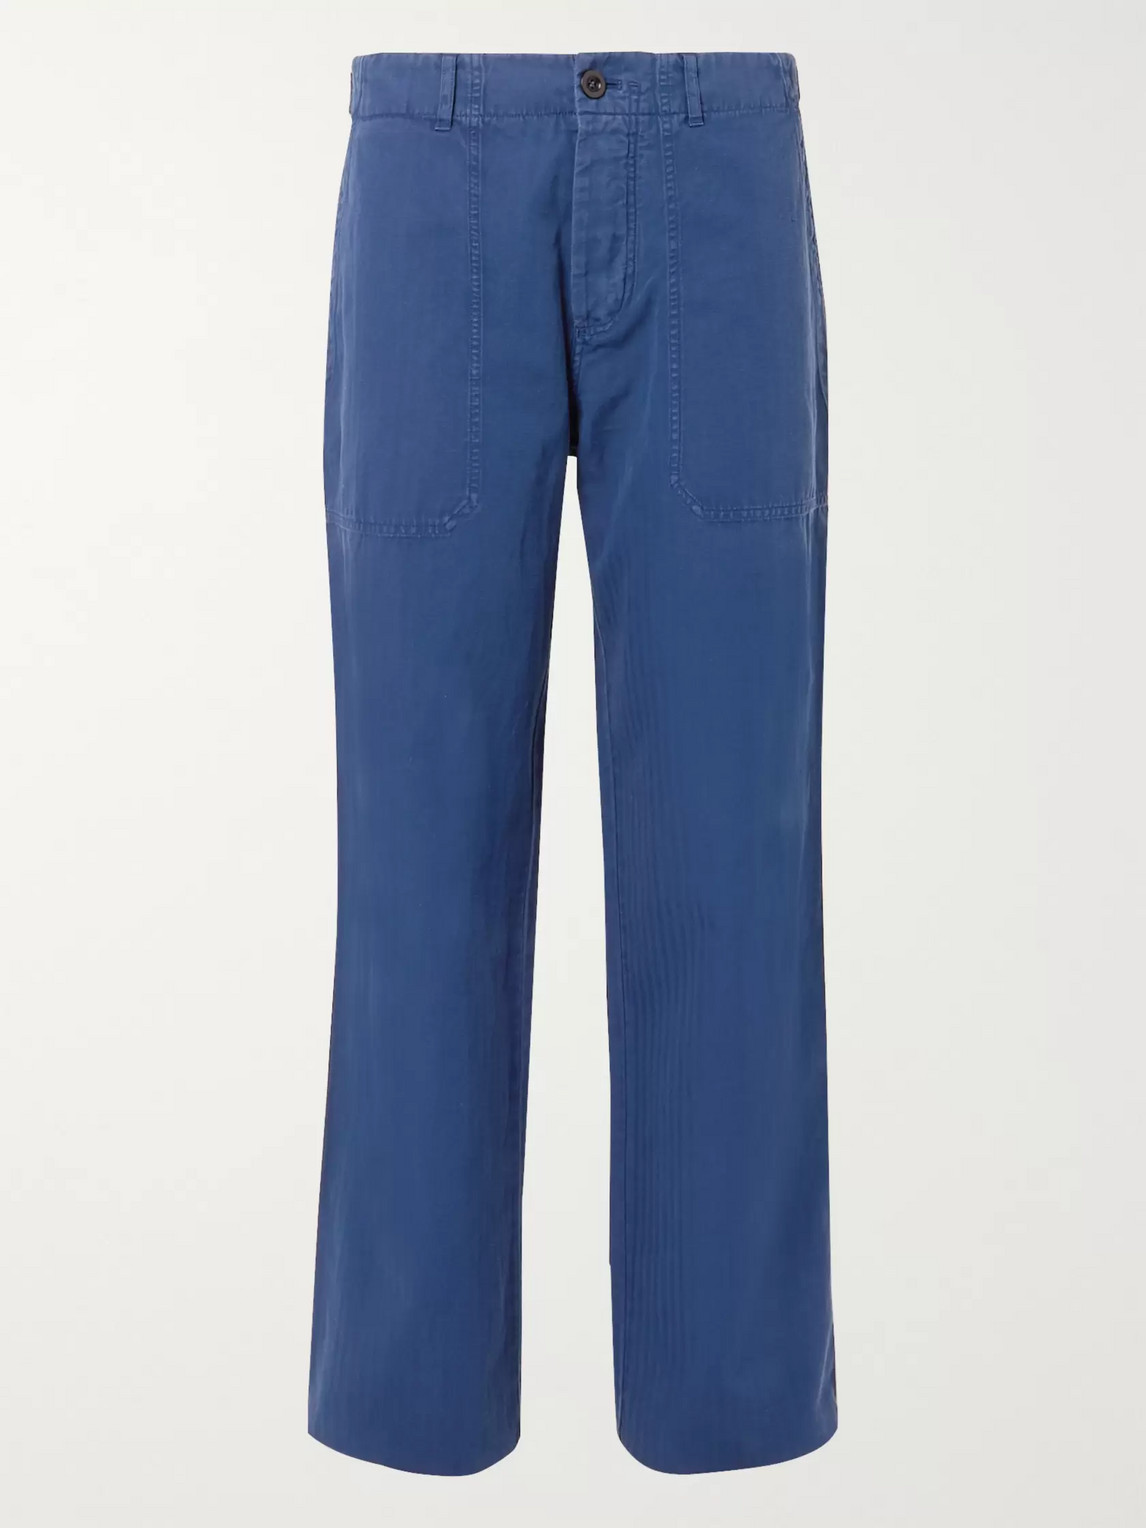 Mr P Herringbone Cotton And Linen-blend Chinos In Blue